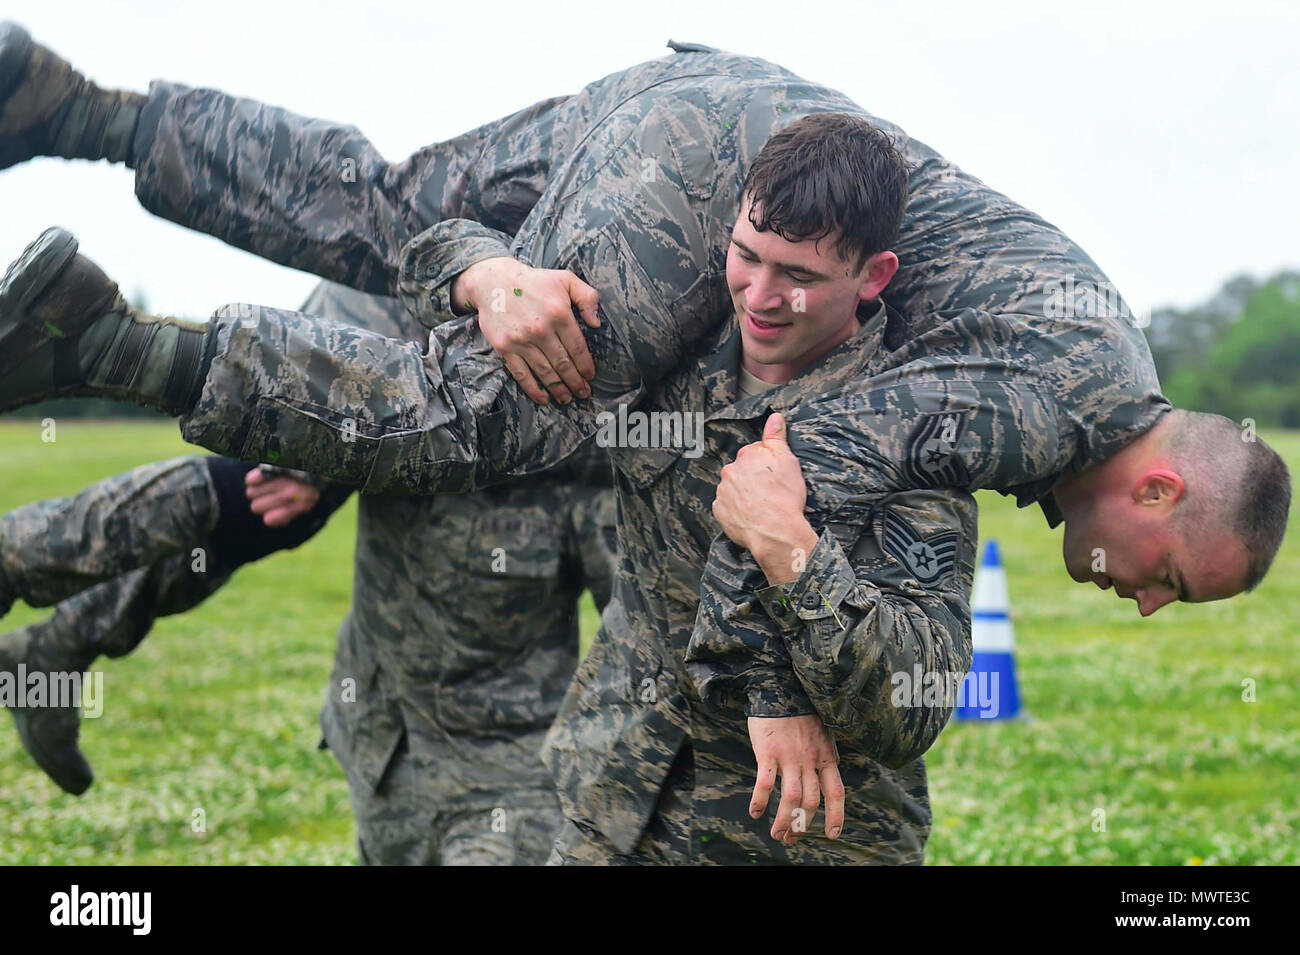 U.S. Air Force Staff Sgt. Gary Good, 633rd Security Forces Squadron unit trainer, performs a buddy carry during a modified Marine Combat Fitness Test at Joint Base Langley-Eustis, Va., April 28, 2017. During the modified Marine Combat Physical Test, Good and his fellow members of the 633rd SFS Emergency Services Team performed a low crawl, high crawl and a fireman carry. Stock Photo